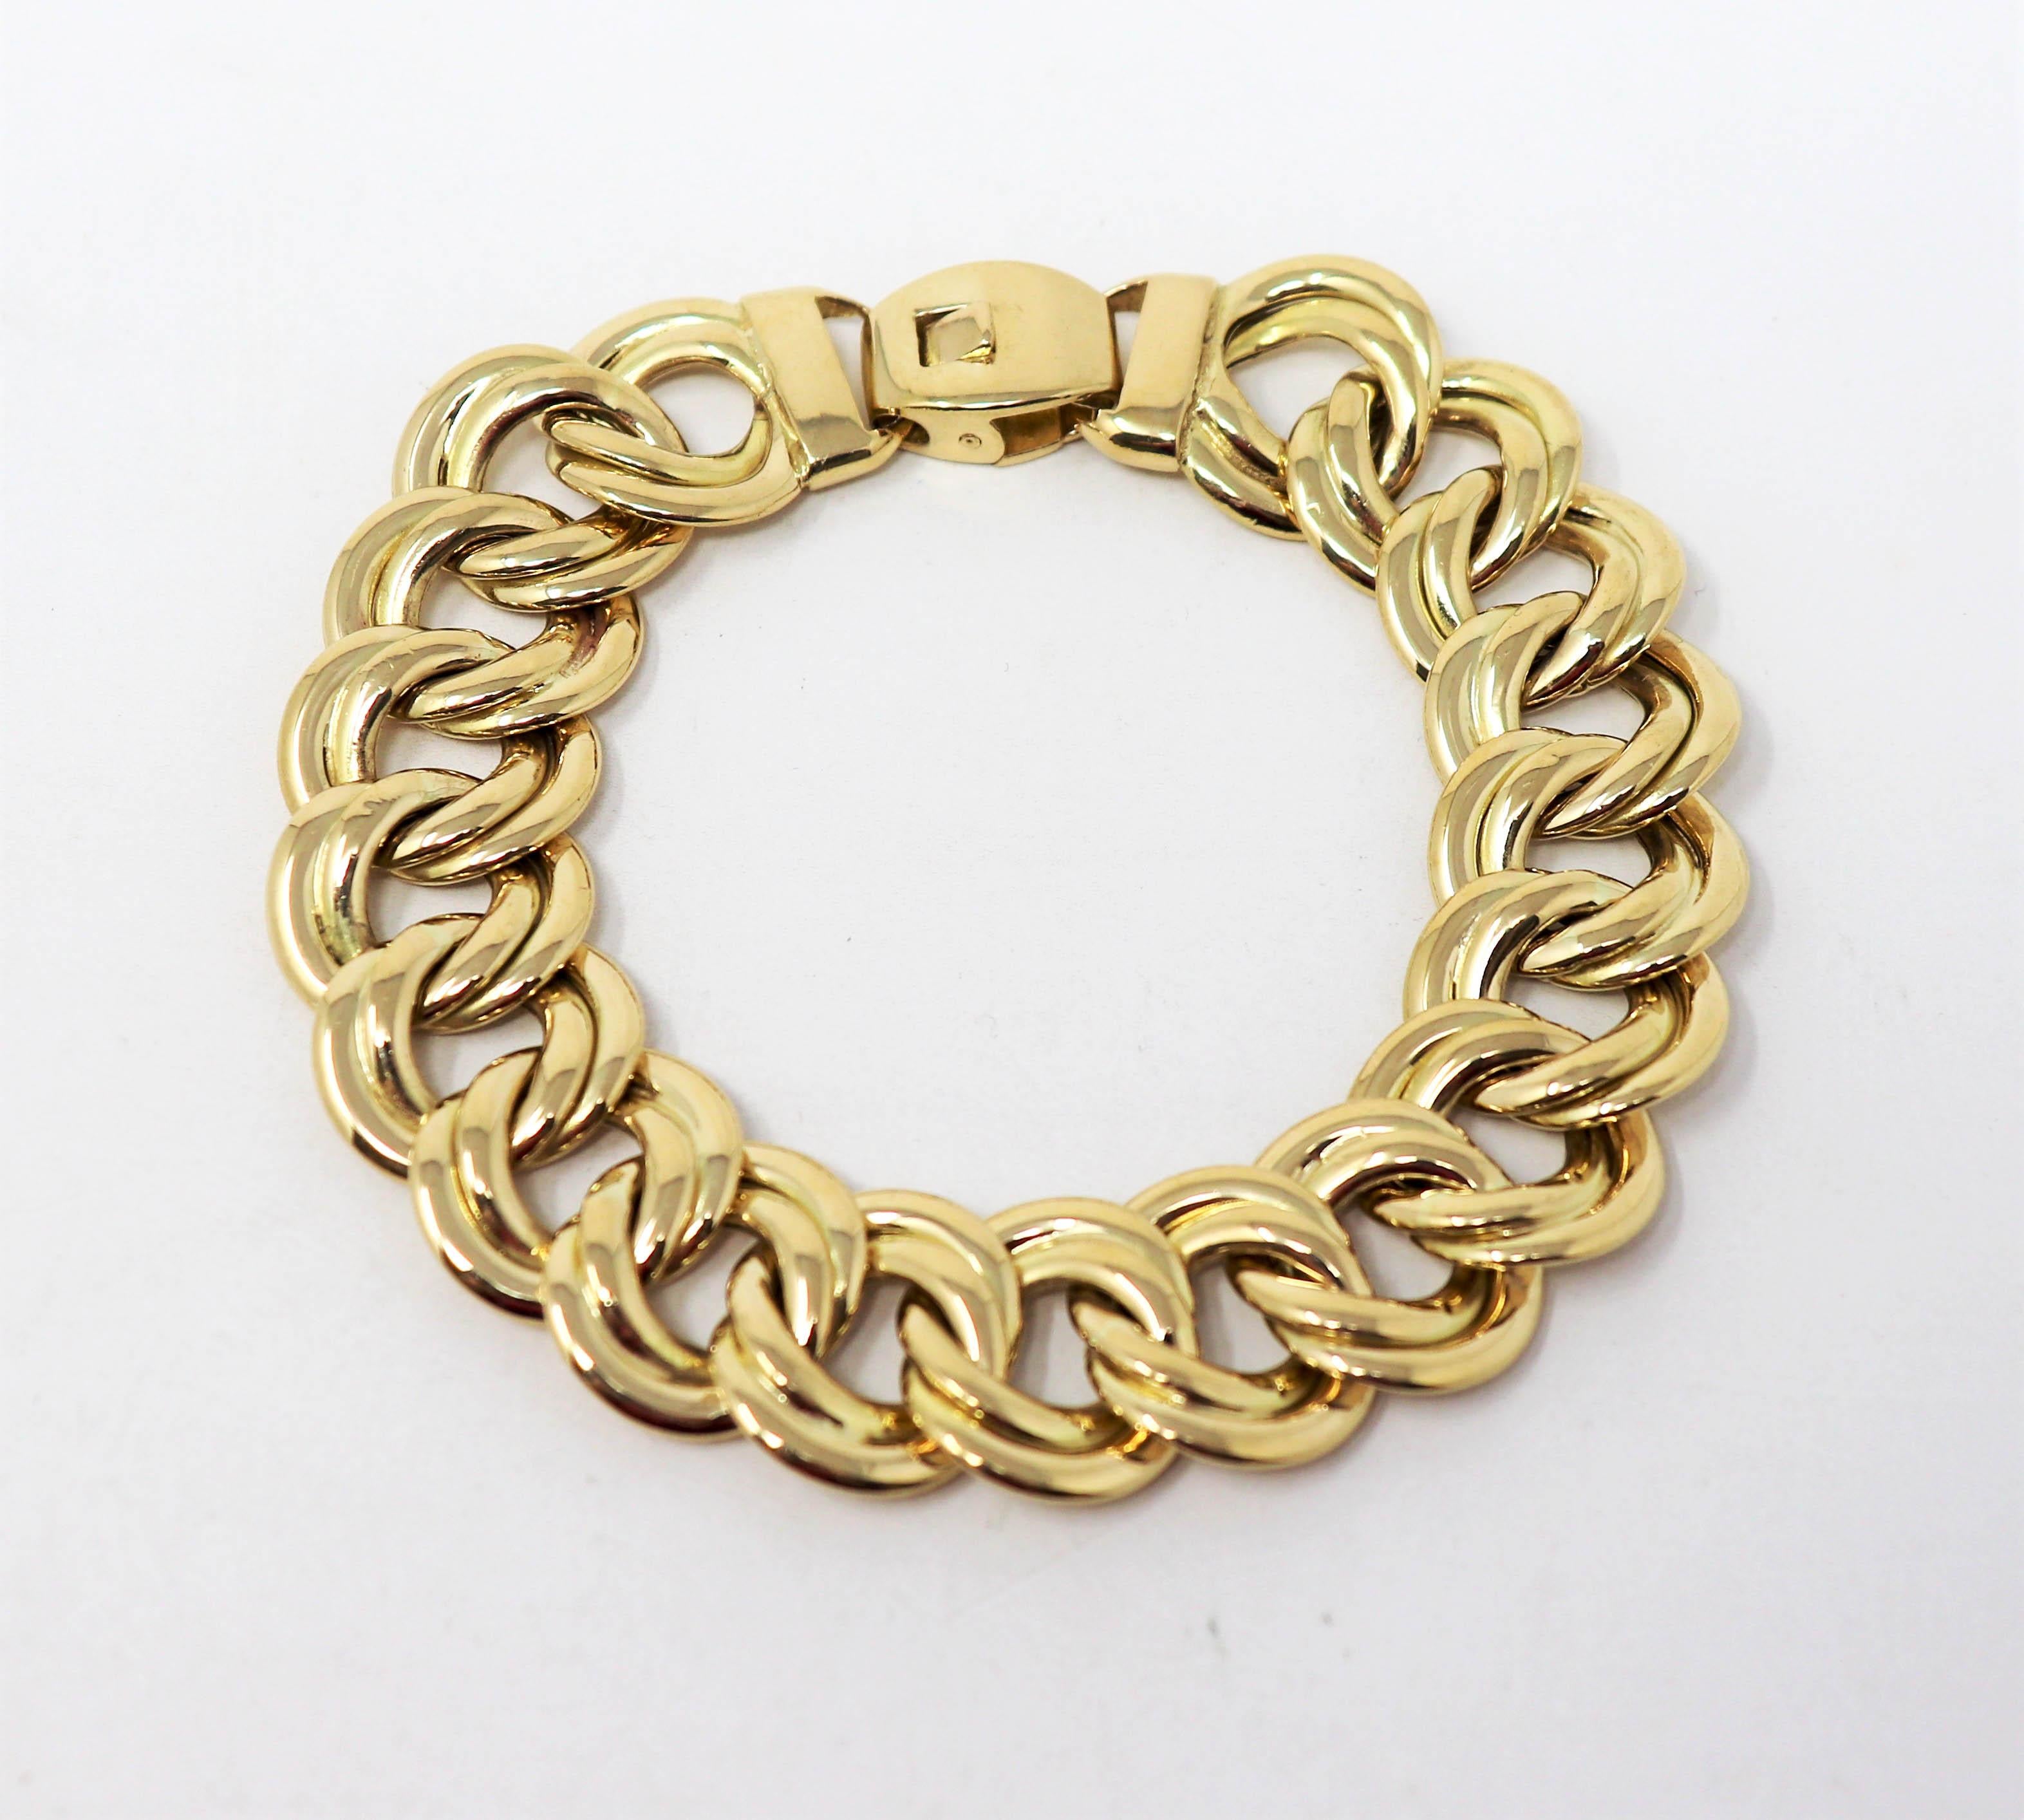 Stunningly simple gold chain link bracelet will stand the test of time. The classic design gently wraps the wrist and exudes a sophisticated elegance. Versatile in both design and color, this bracelet can be paired with other bracelets for a more